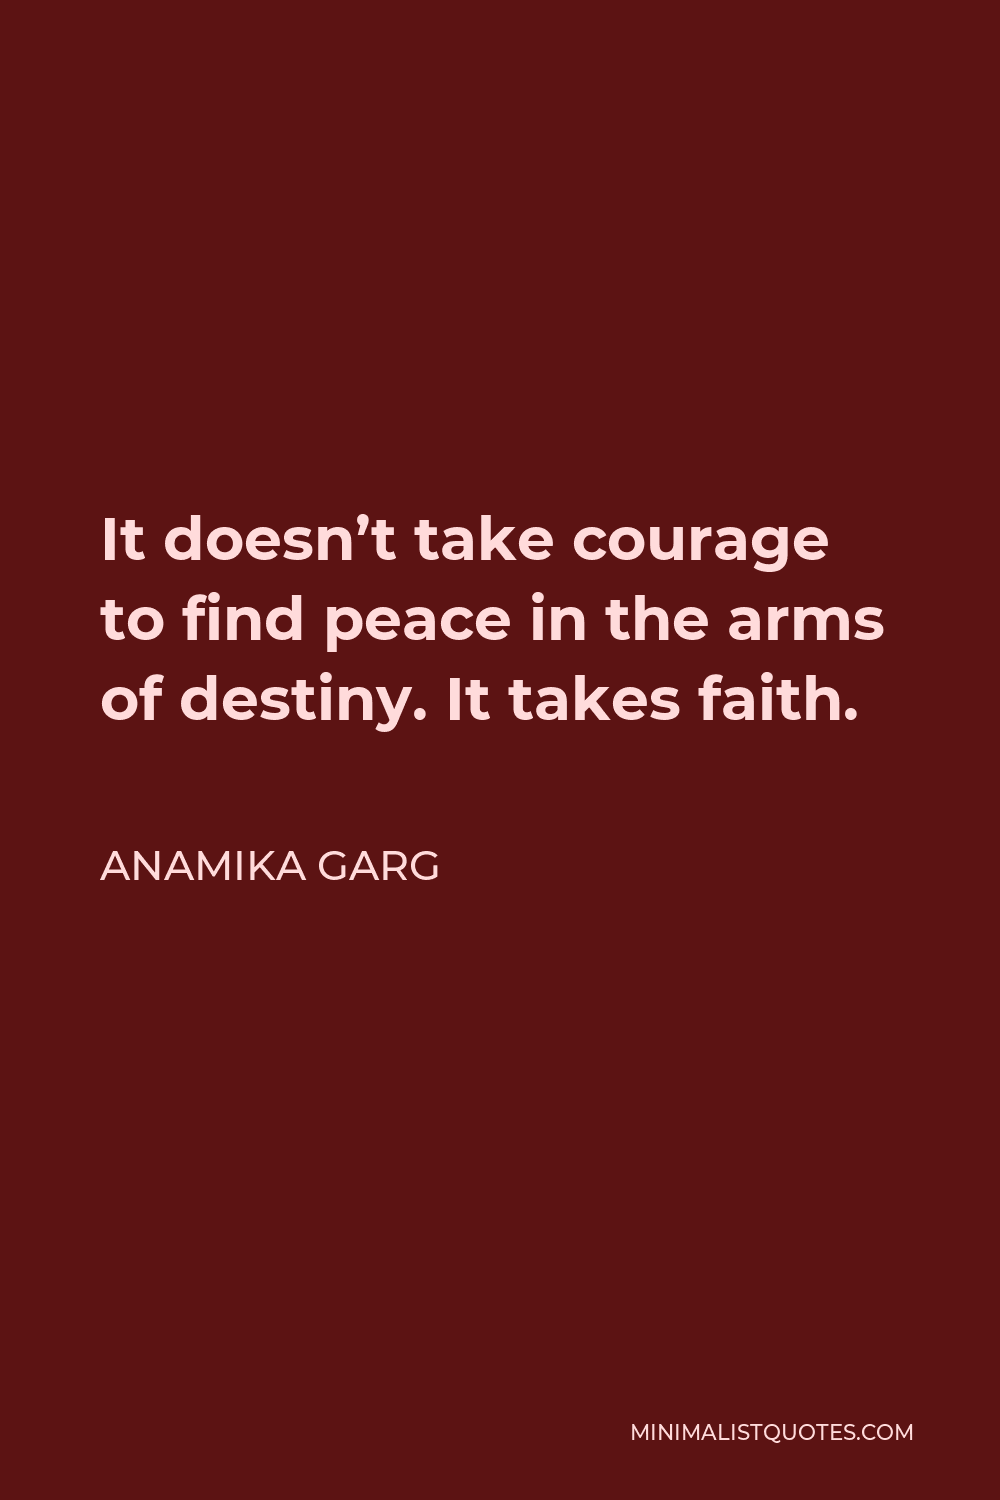 Anamika Garg Quote - It doesn’t take courage to find peace in the arms of destiny. It takes faith.